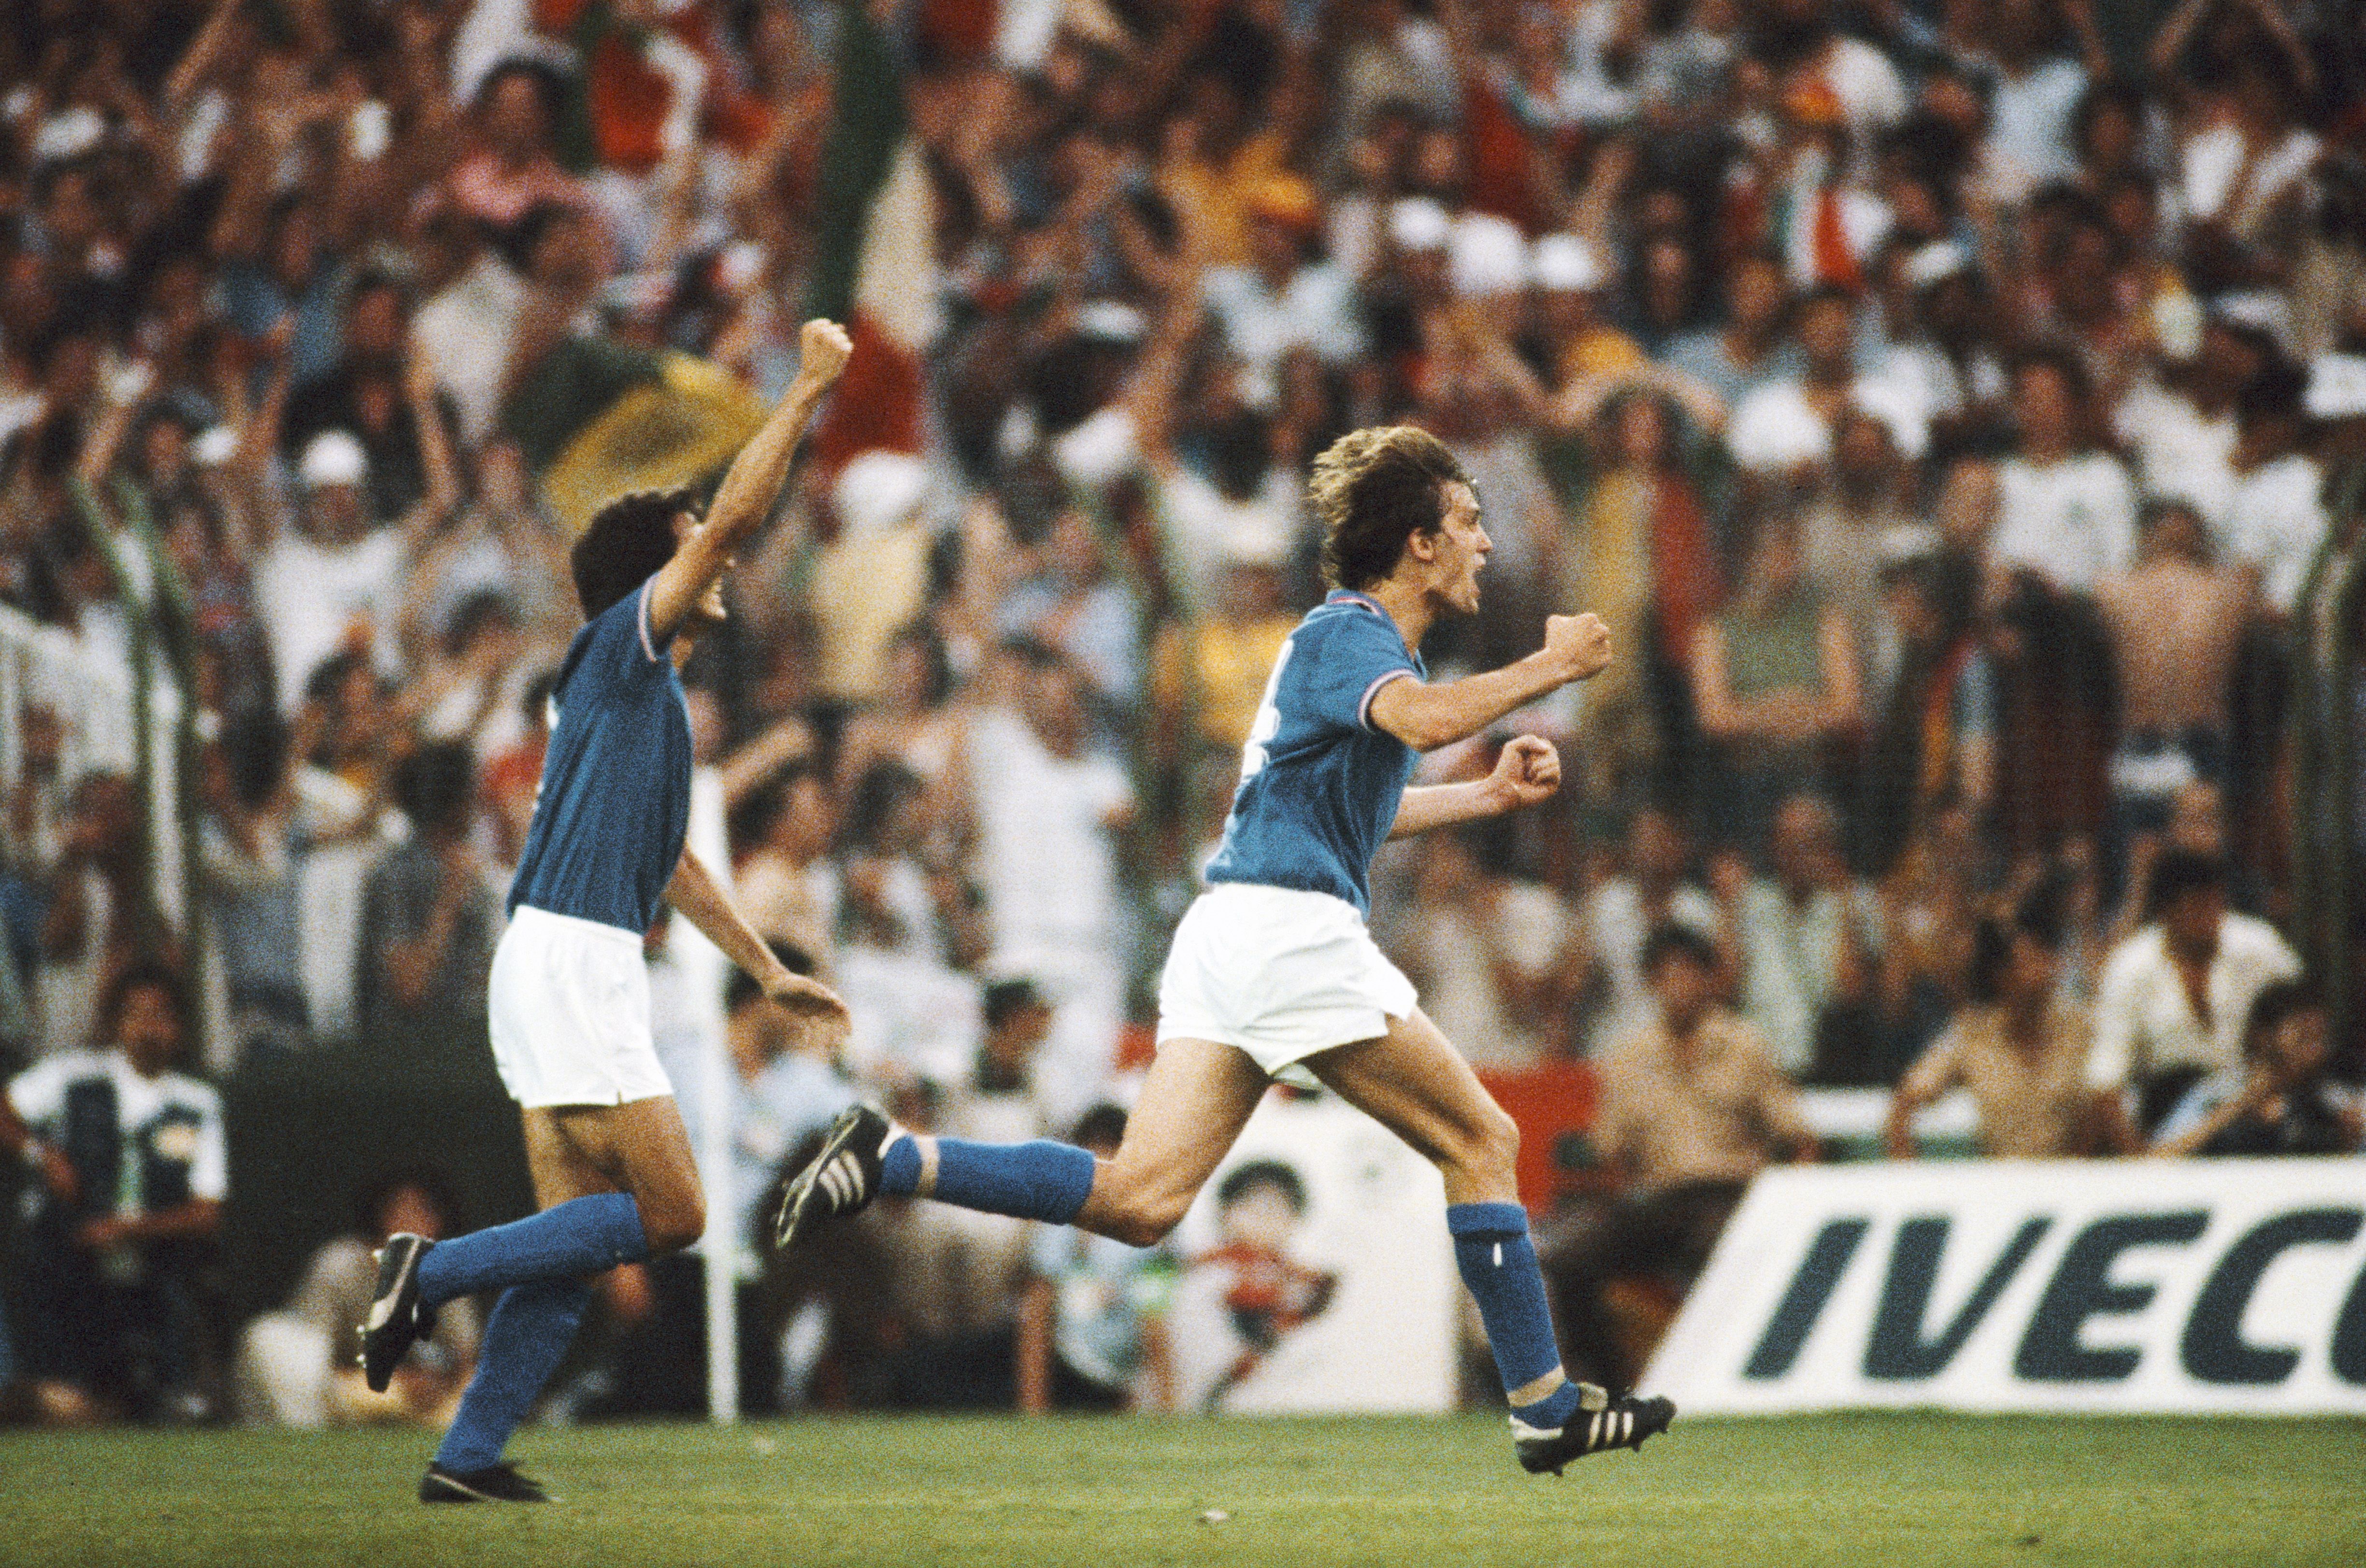 Tardelli's iconic celebration in 1986 World Cup final.